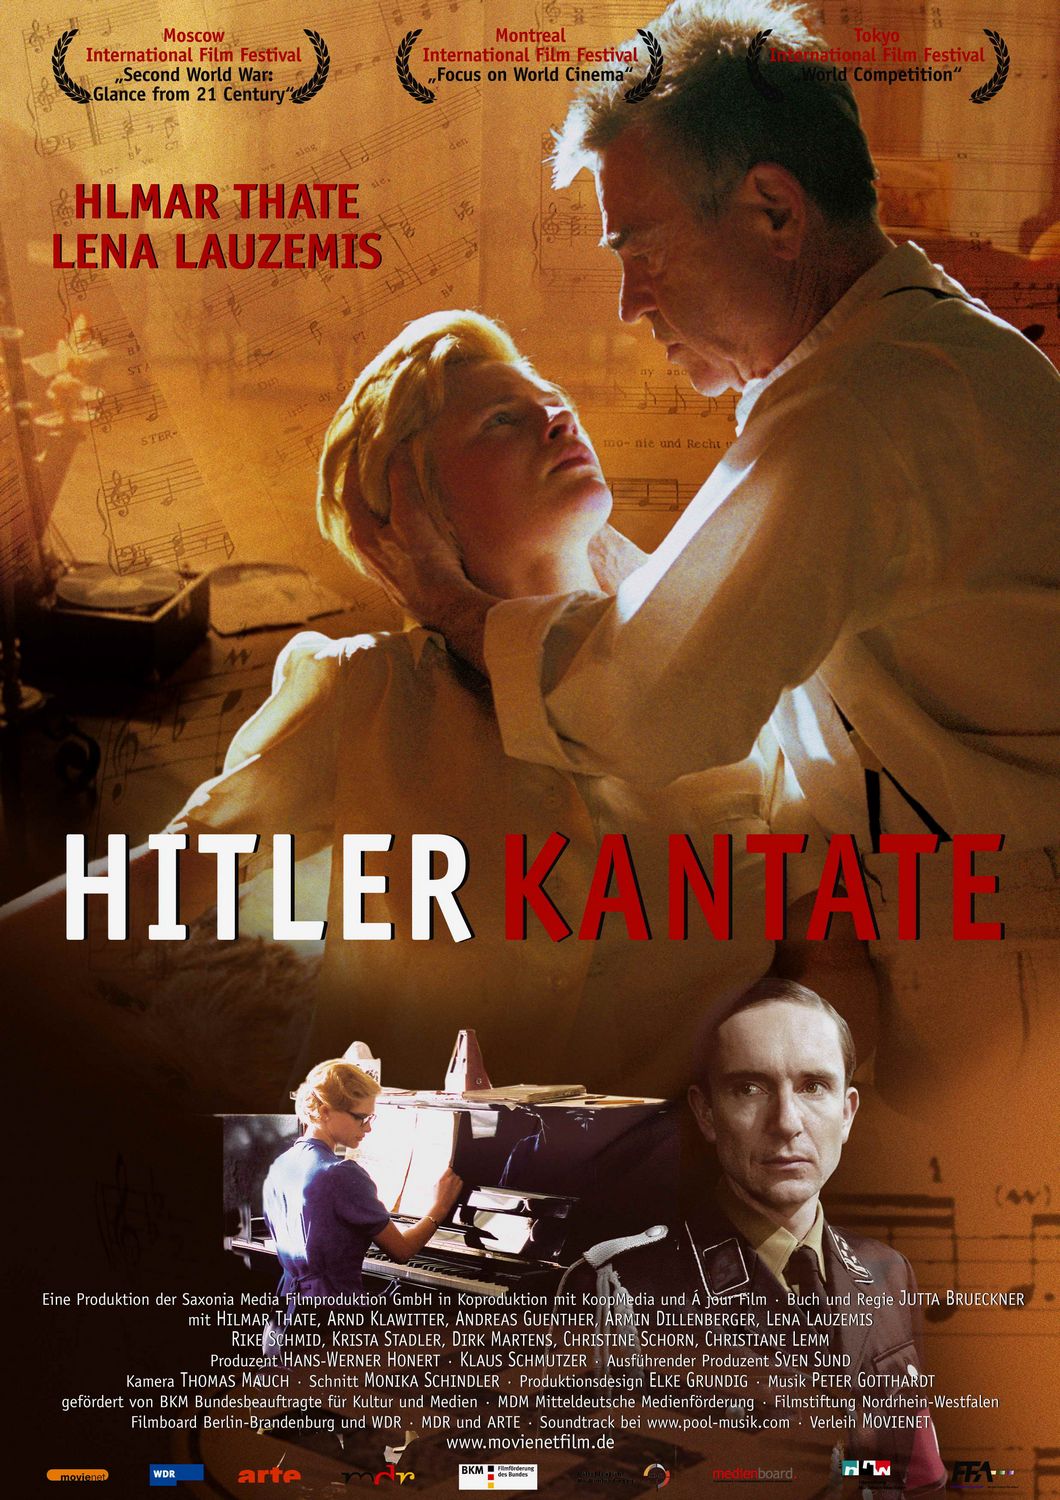 Extra Large Movie Poster Image for Hitlerkantate, Die 